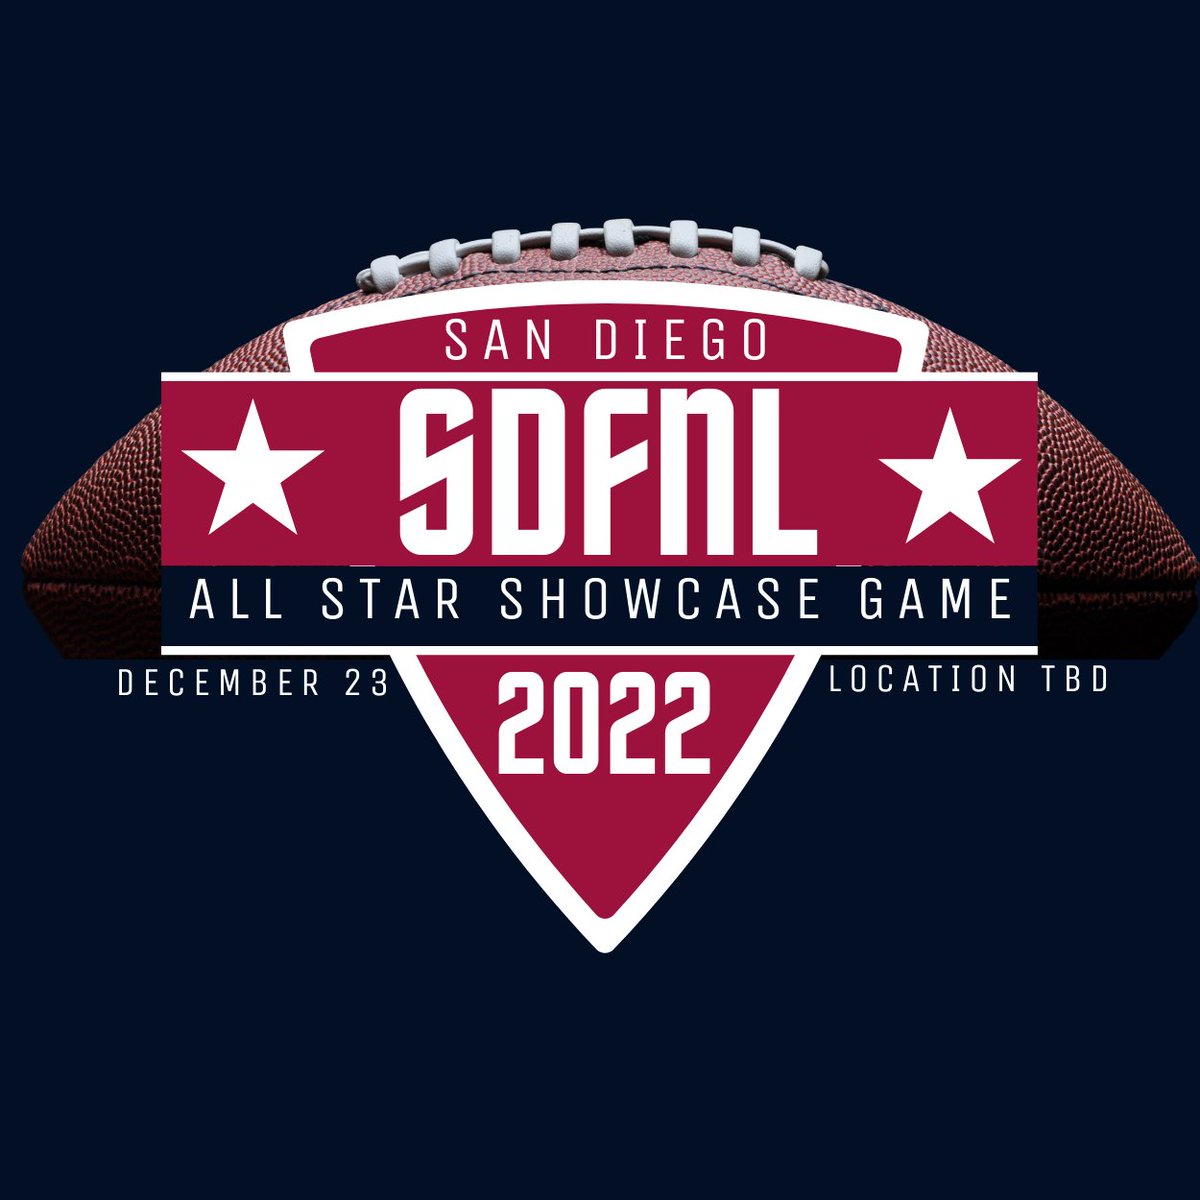 Thank you for the invitation to the SDFNL All Star Showcase Game! I can't wait to show my skills. @CoachJC3 @MBASports1 @TeamMakasi @SDPrepInsider @Daygofootball @SDFBRecruits @OHSEAGLESFB @eaglesohsfb @OHS_FB_Boosters